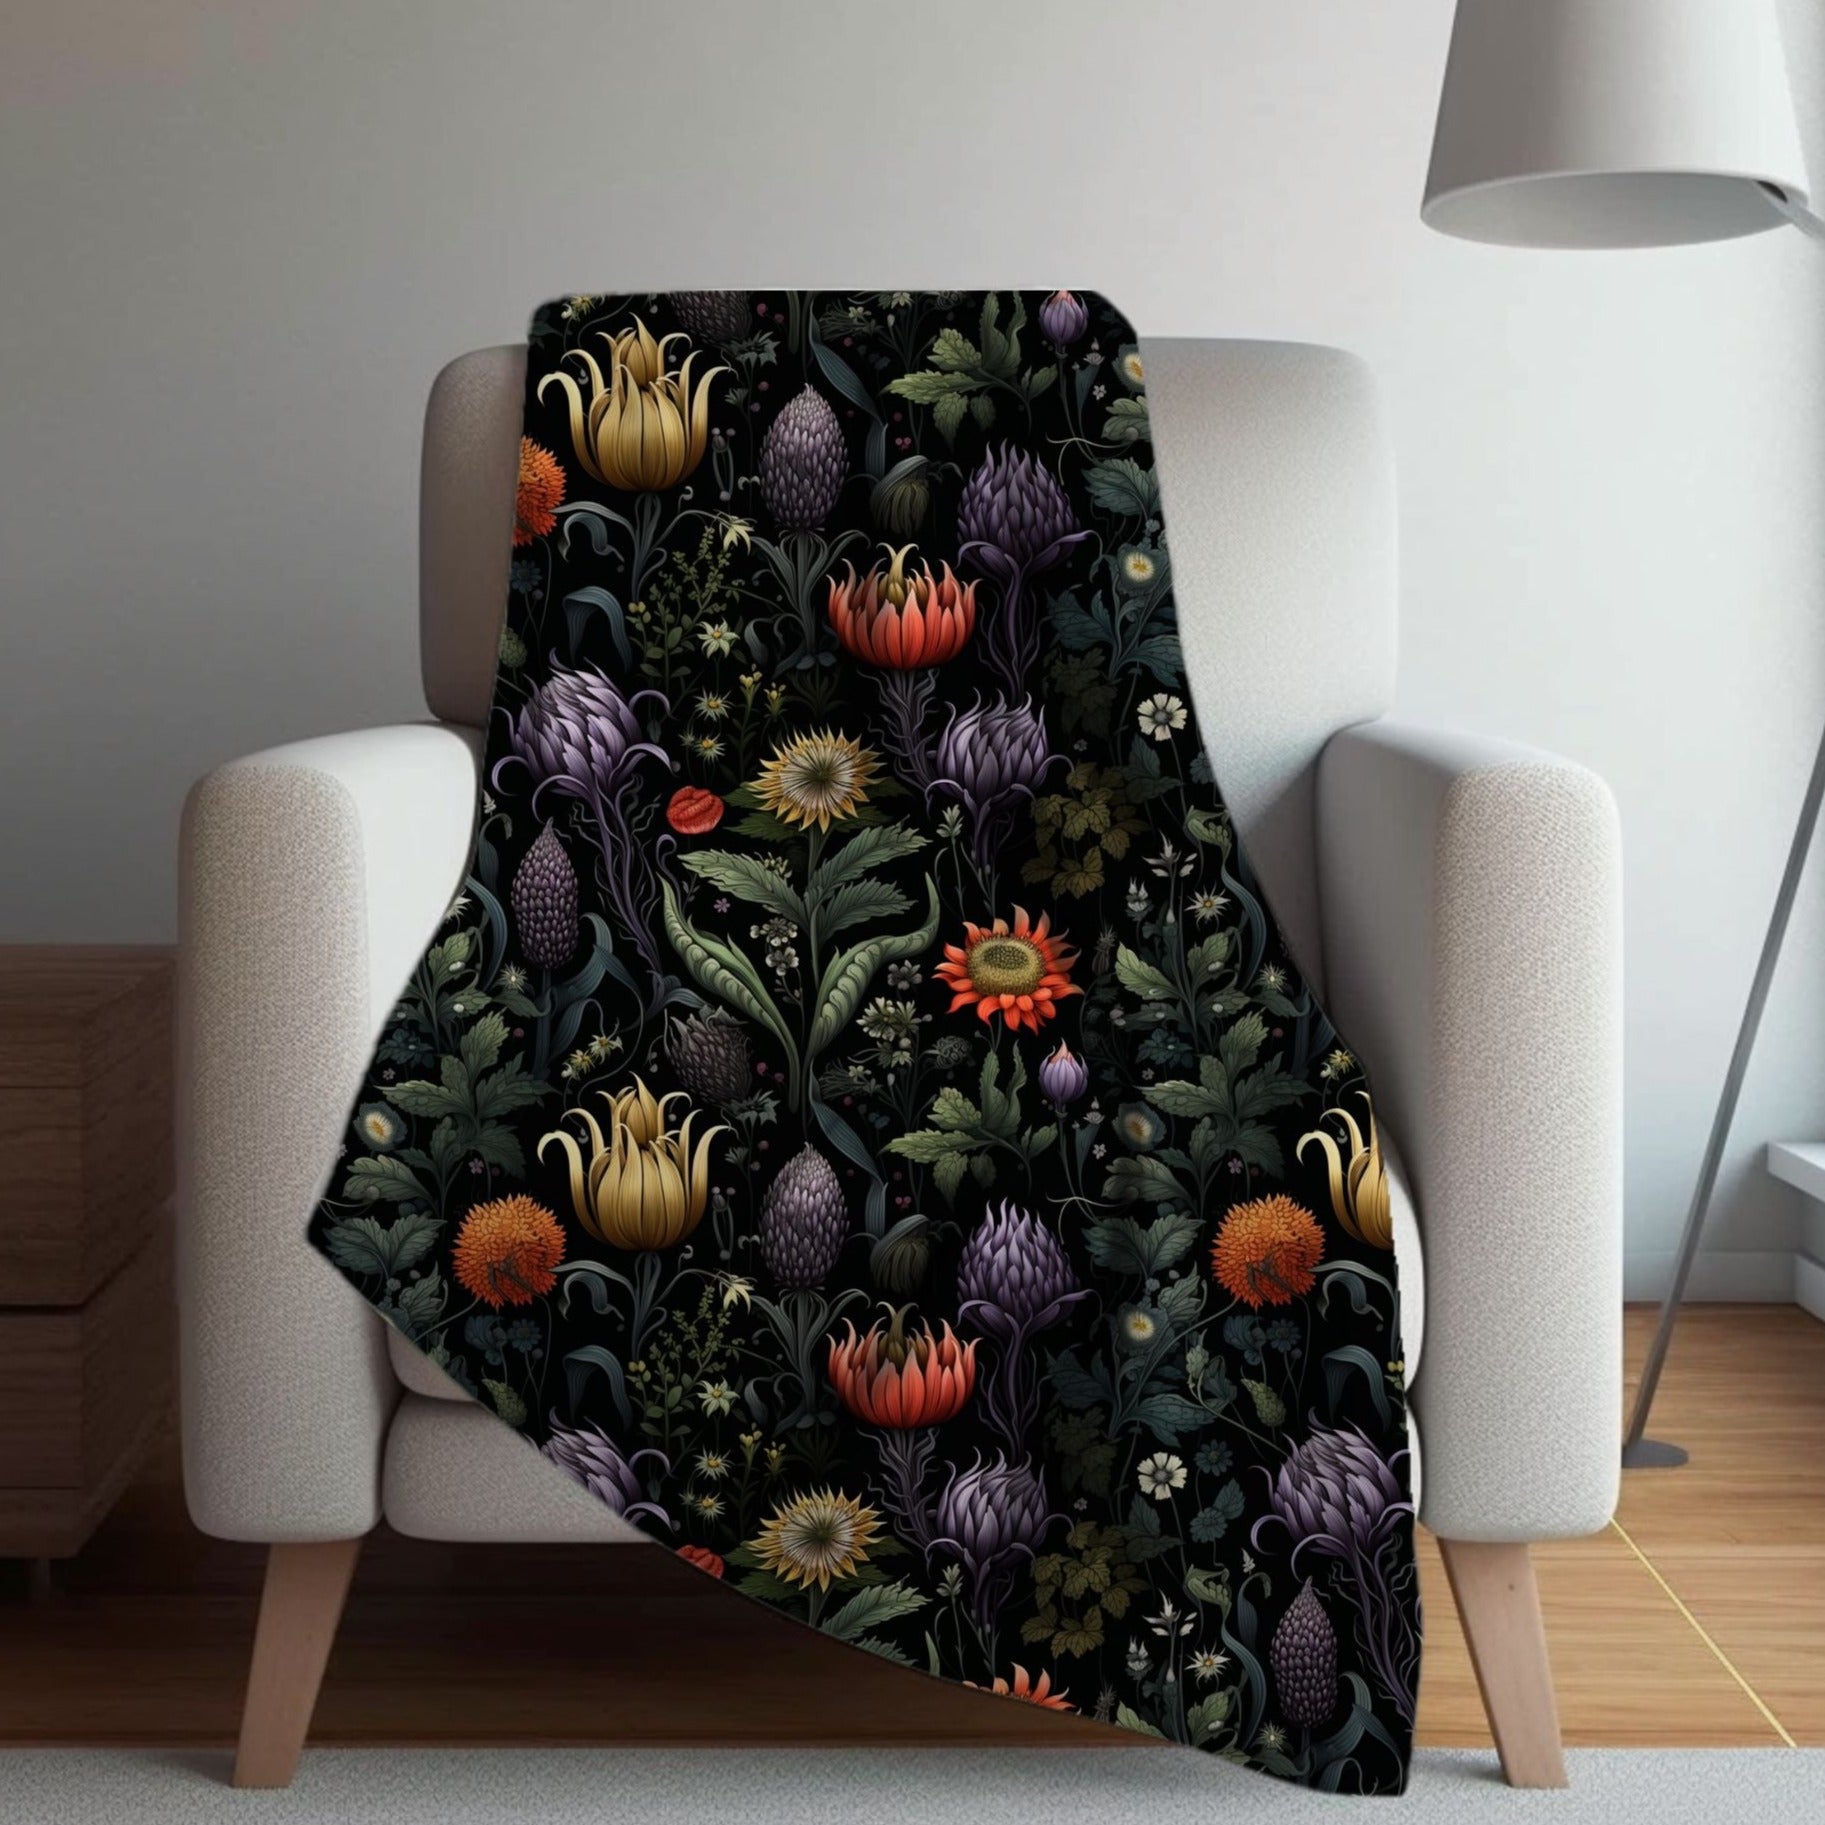 Enchanted Autumn Floral Throw Blanket in Sherpa or Velveteen Plush